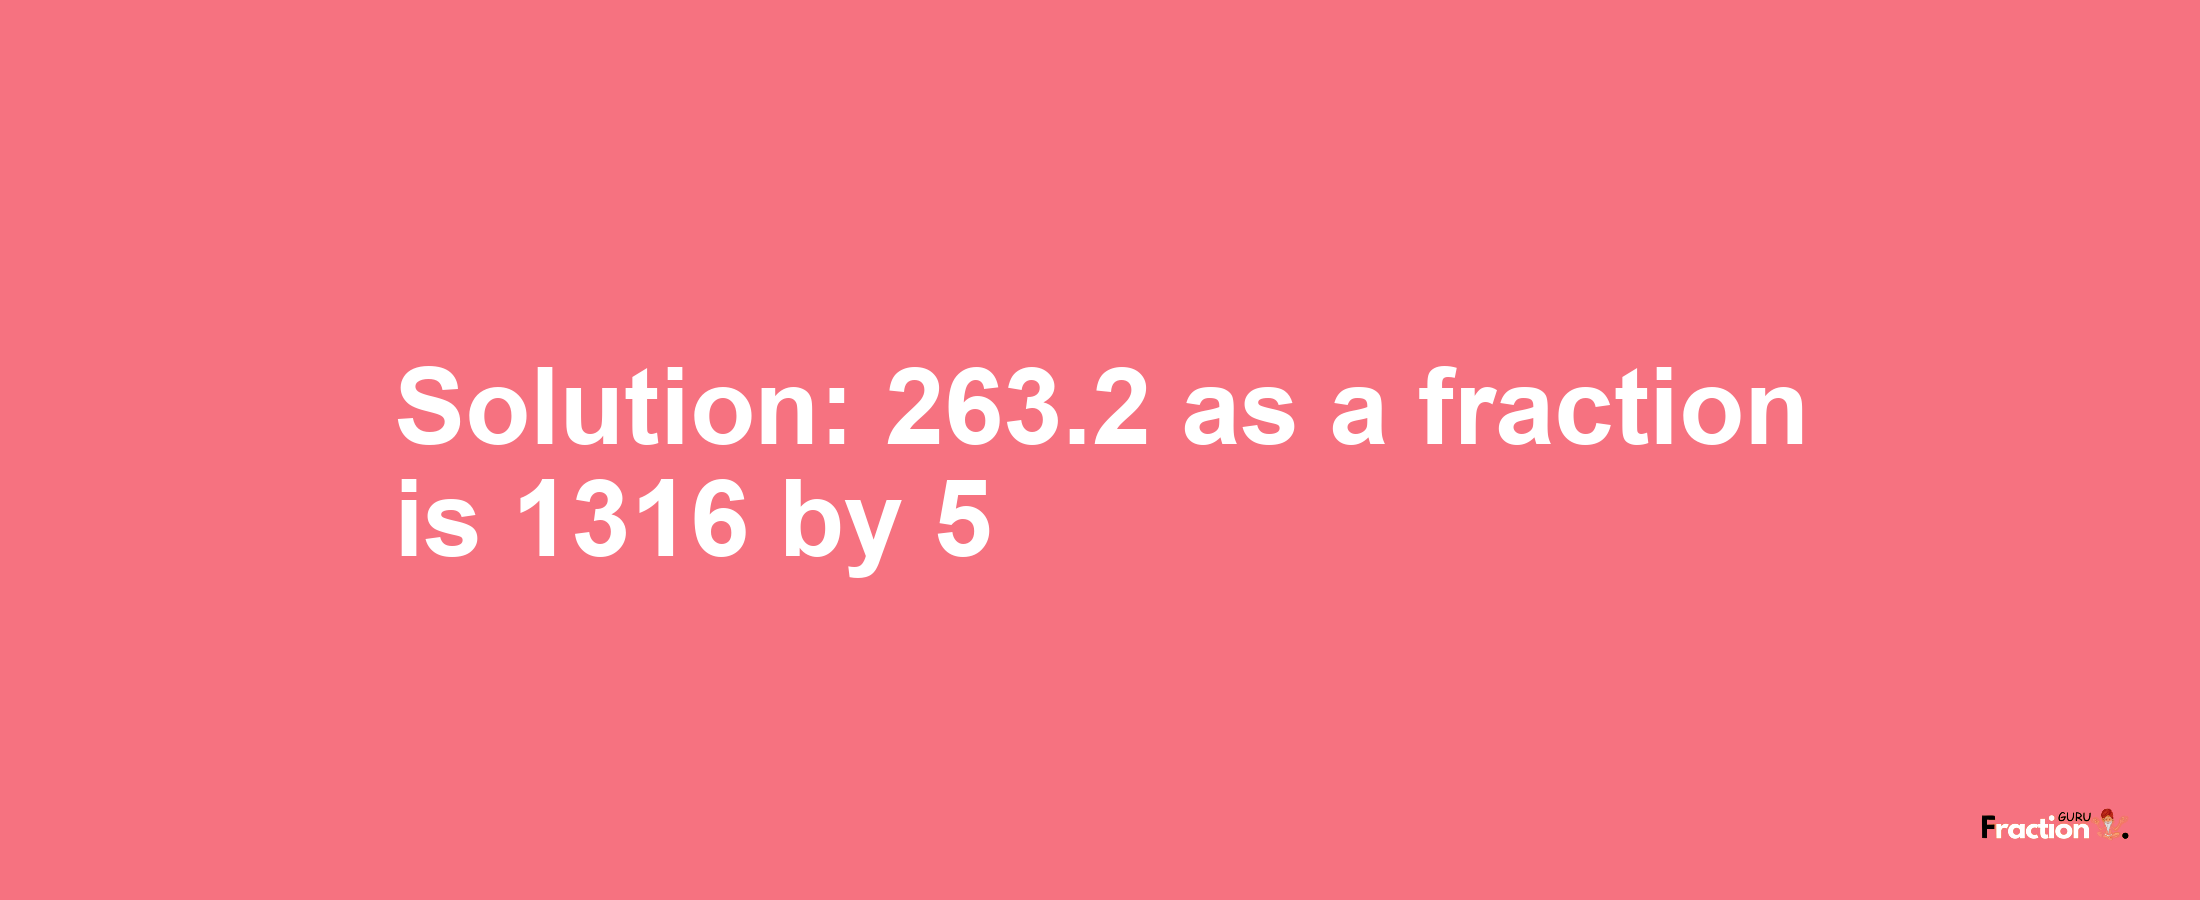 Solution:263.2 as a fraction is 1316/5